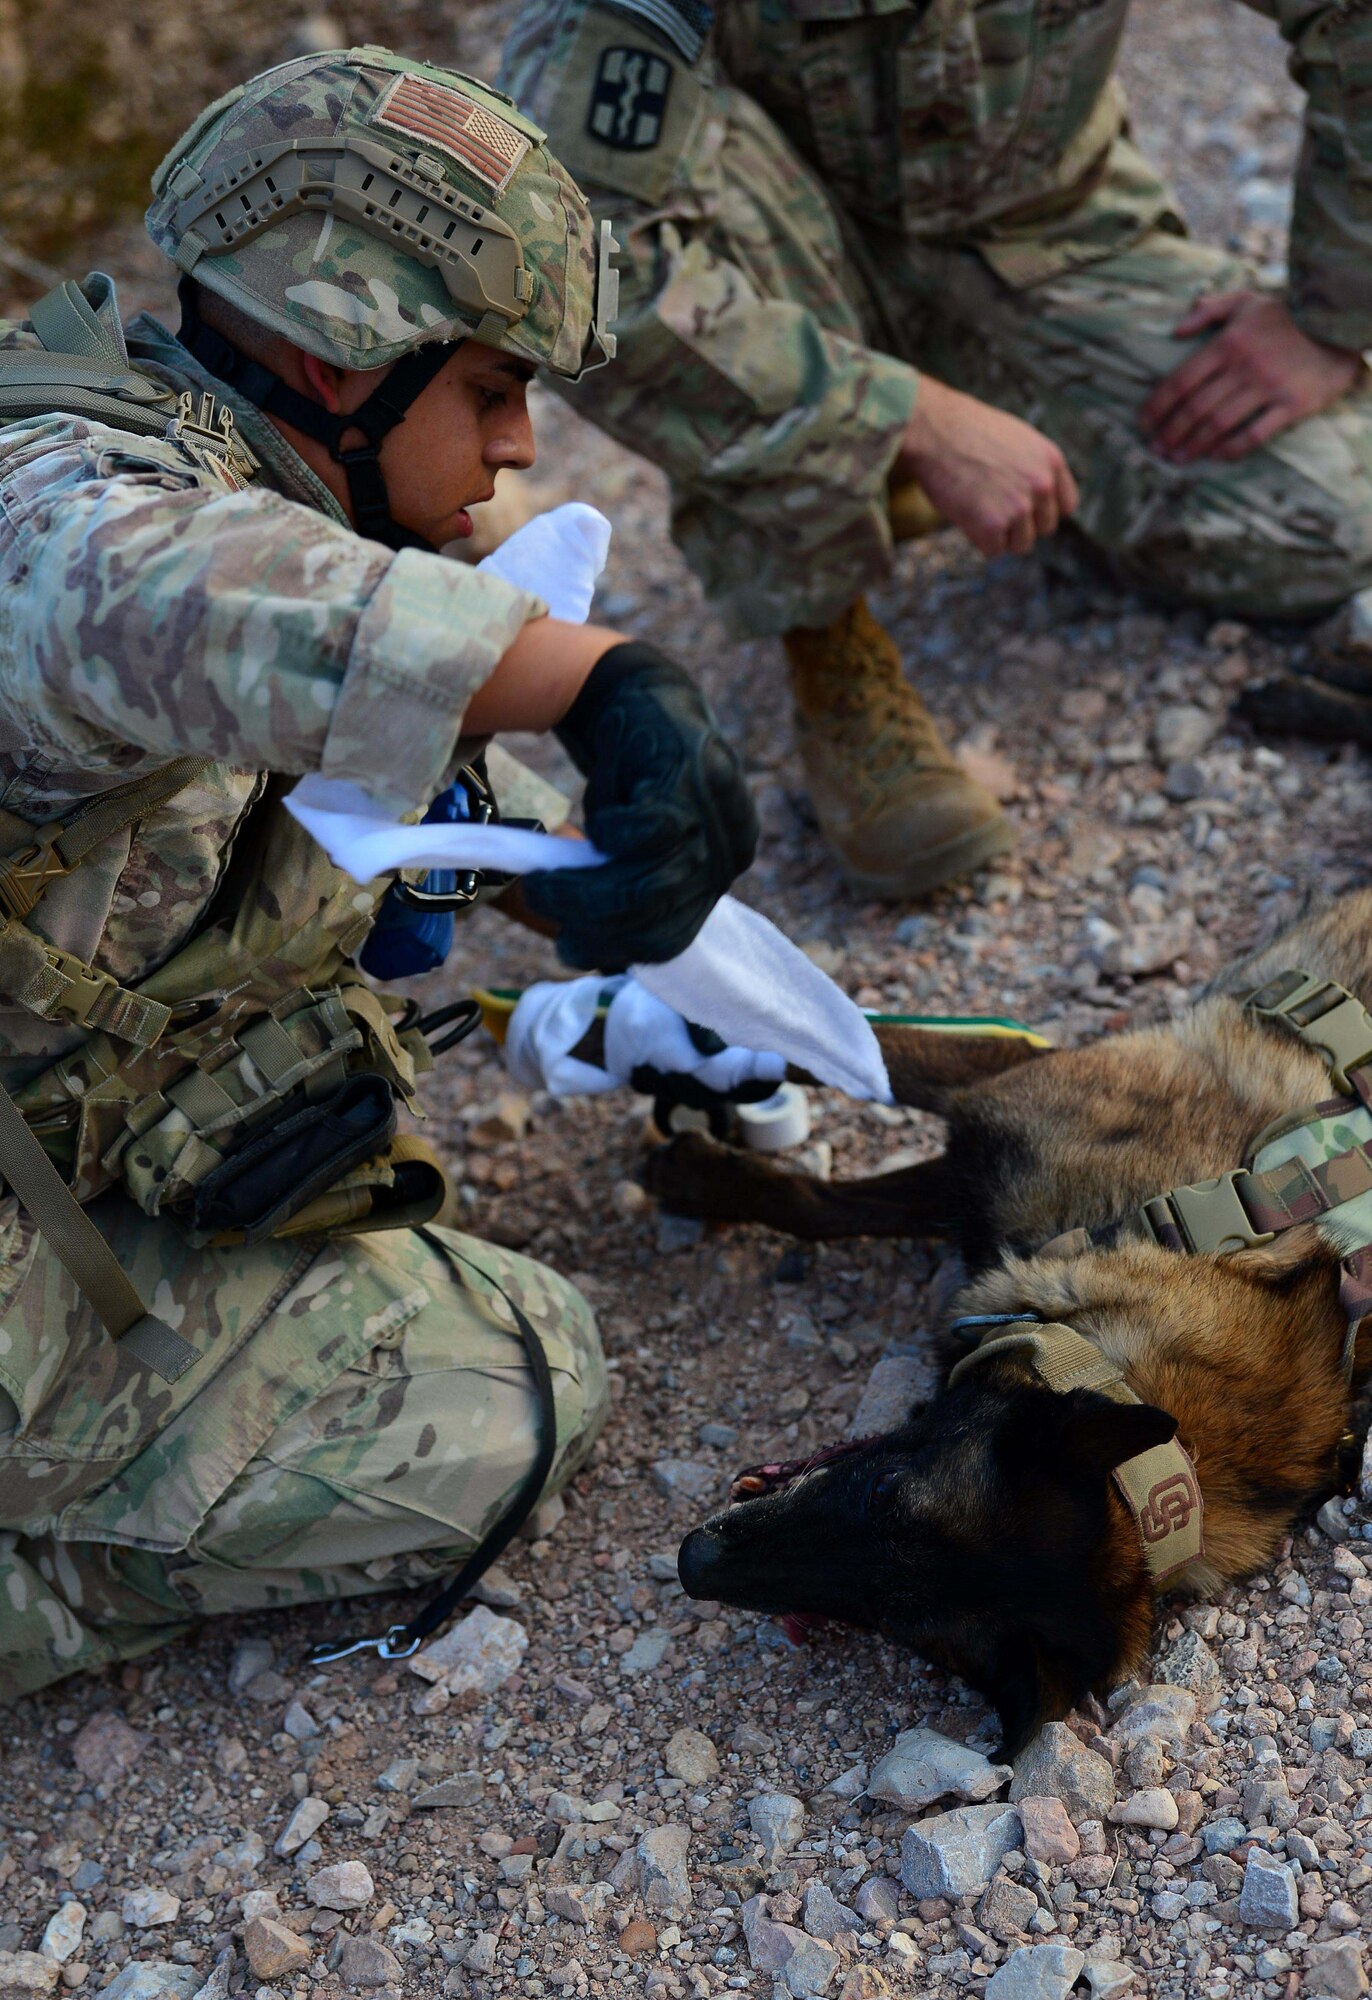 Staff Sgt. Juan Hinojosa, 99th Security Forces Squadron military working dog handler secures a splint to Erik, 99th SFS MWD, during a training exercise Aug. 8, 2018, at Nellis Air Force Base, Nev. The exercise included a trail of possible dangers, a “live” gunfire situation and ended with an injury scenario where handlers had to apply their veterinary knowledge. (U.S. Air Force Photo by Airman 1st Class Haley Stevens)